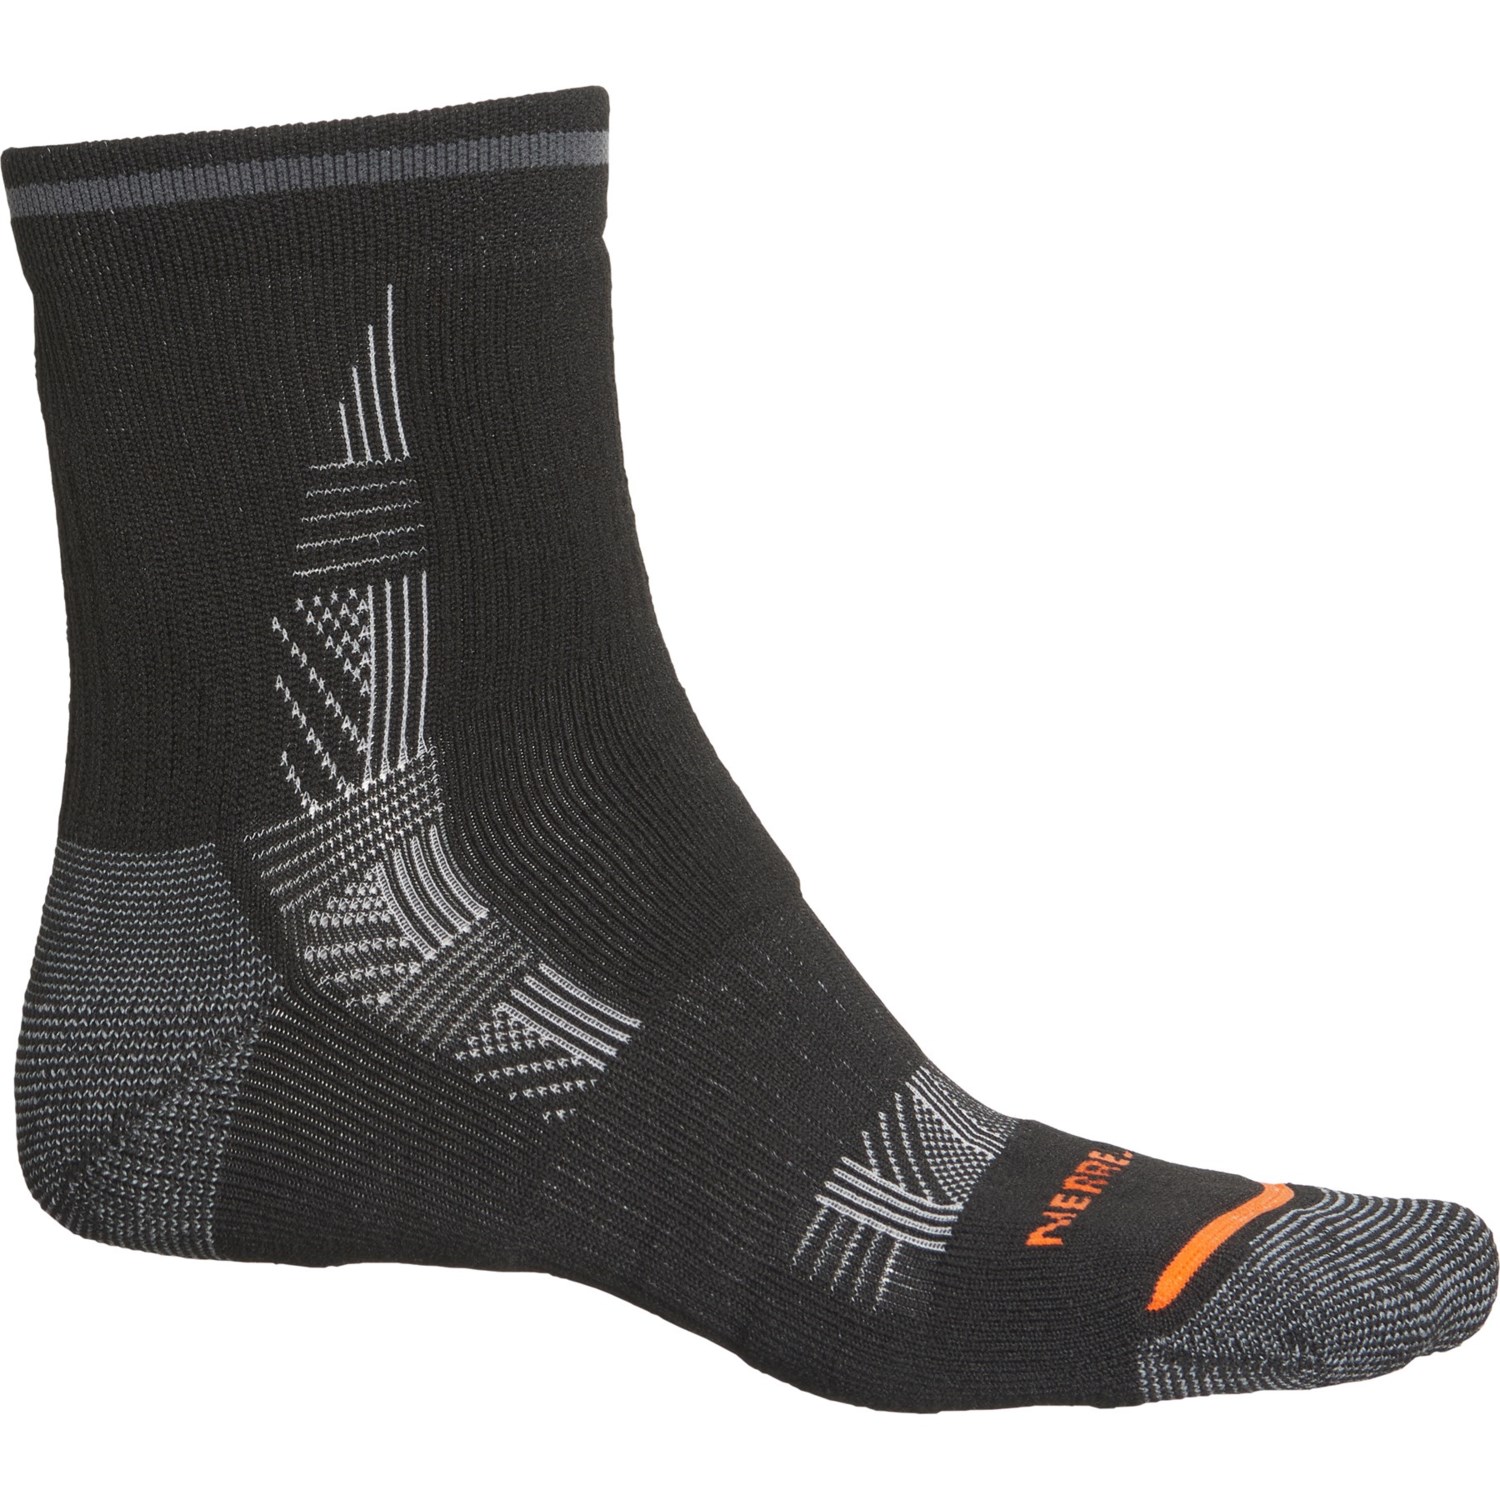 Merrell Cushion Connection Mid Socks (For Men) - Save 41%